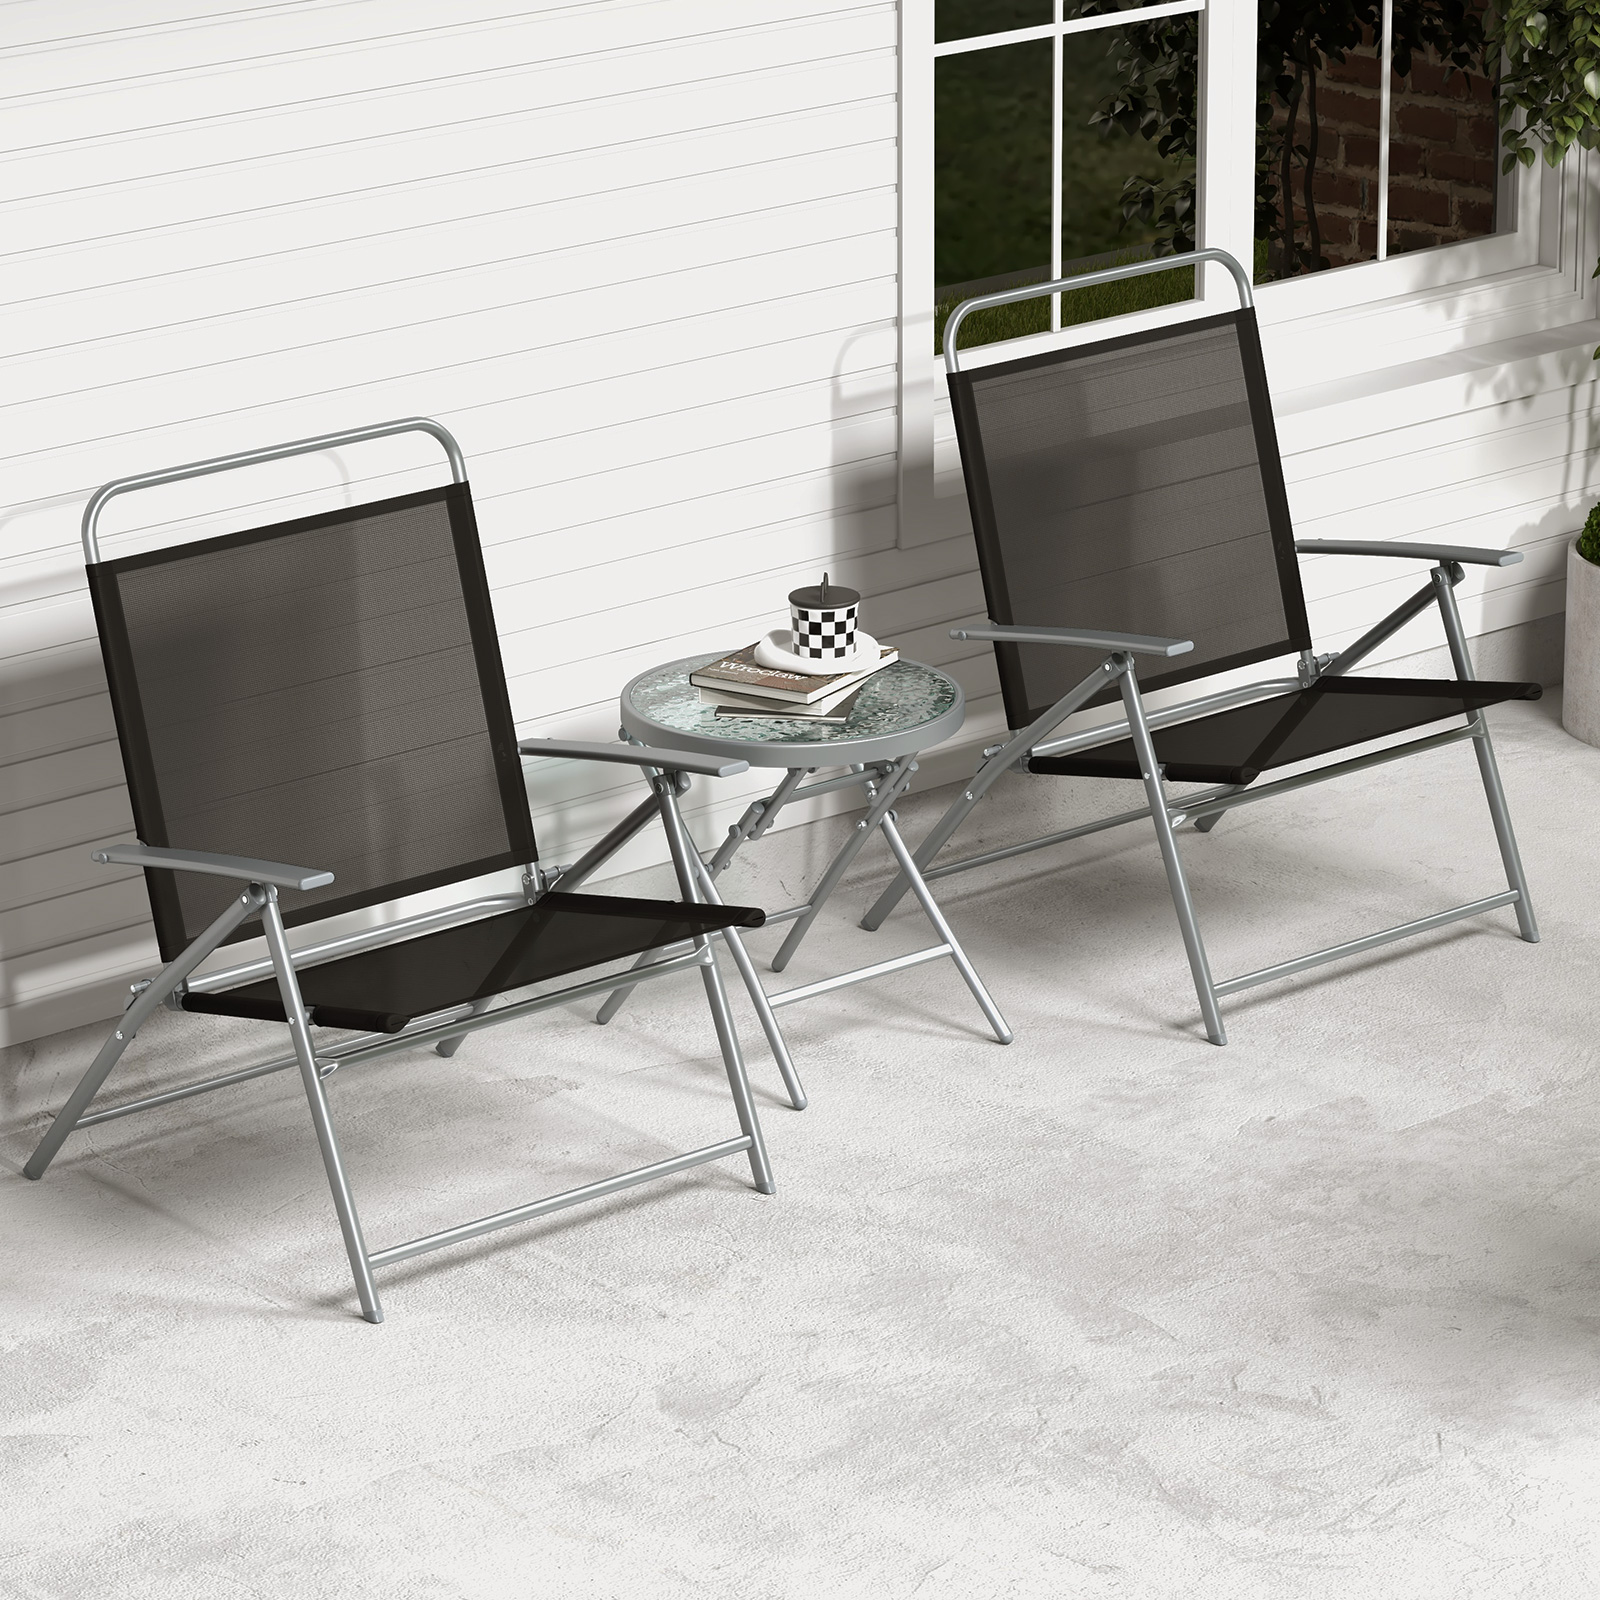 3_Pieces_Patio_Bistro_Set_Foldable_Chairs_and_Table_with_Ripple_like_Glass_Tabletop-7.jpg